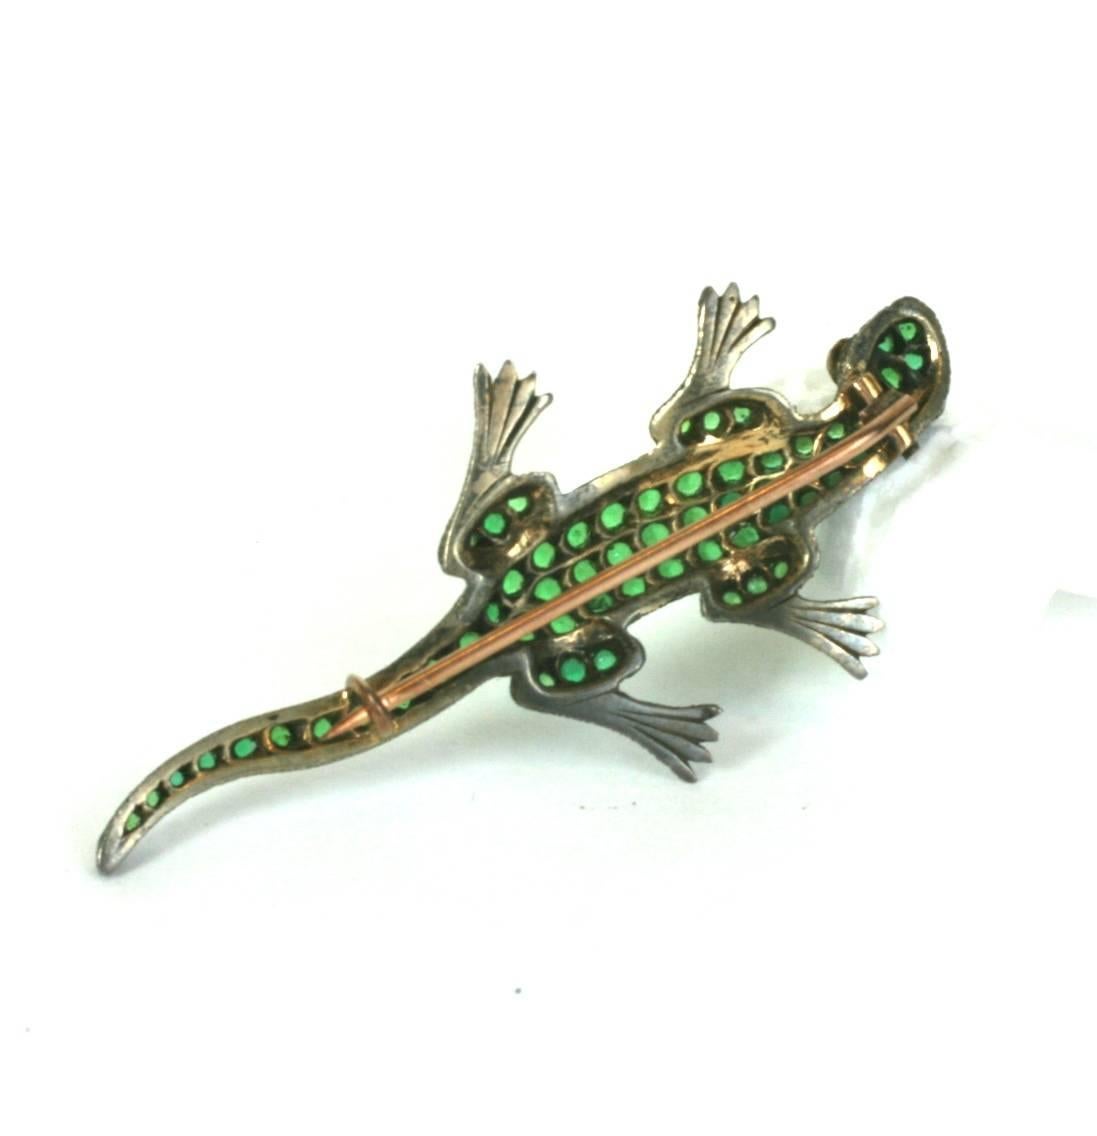 Charming Victorian Jeweled Lizard Brooch For Sale 1